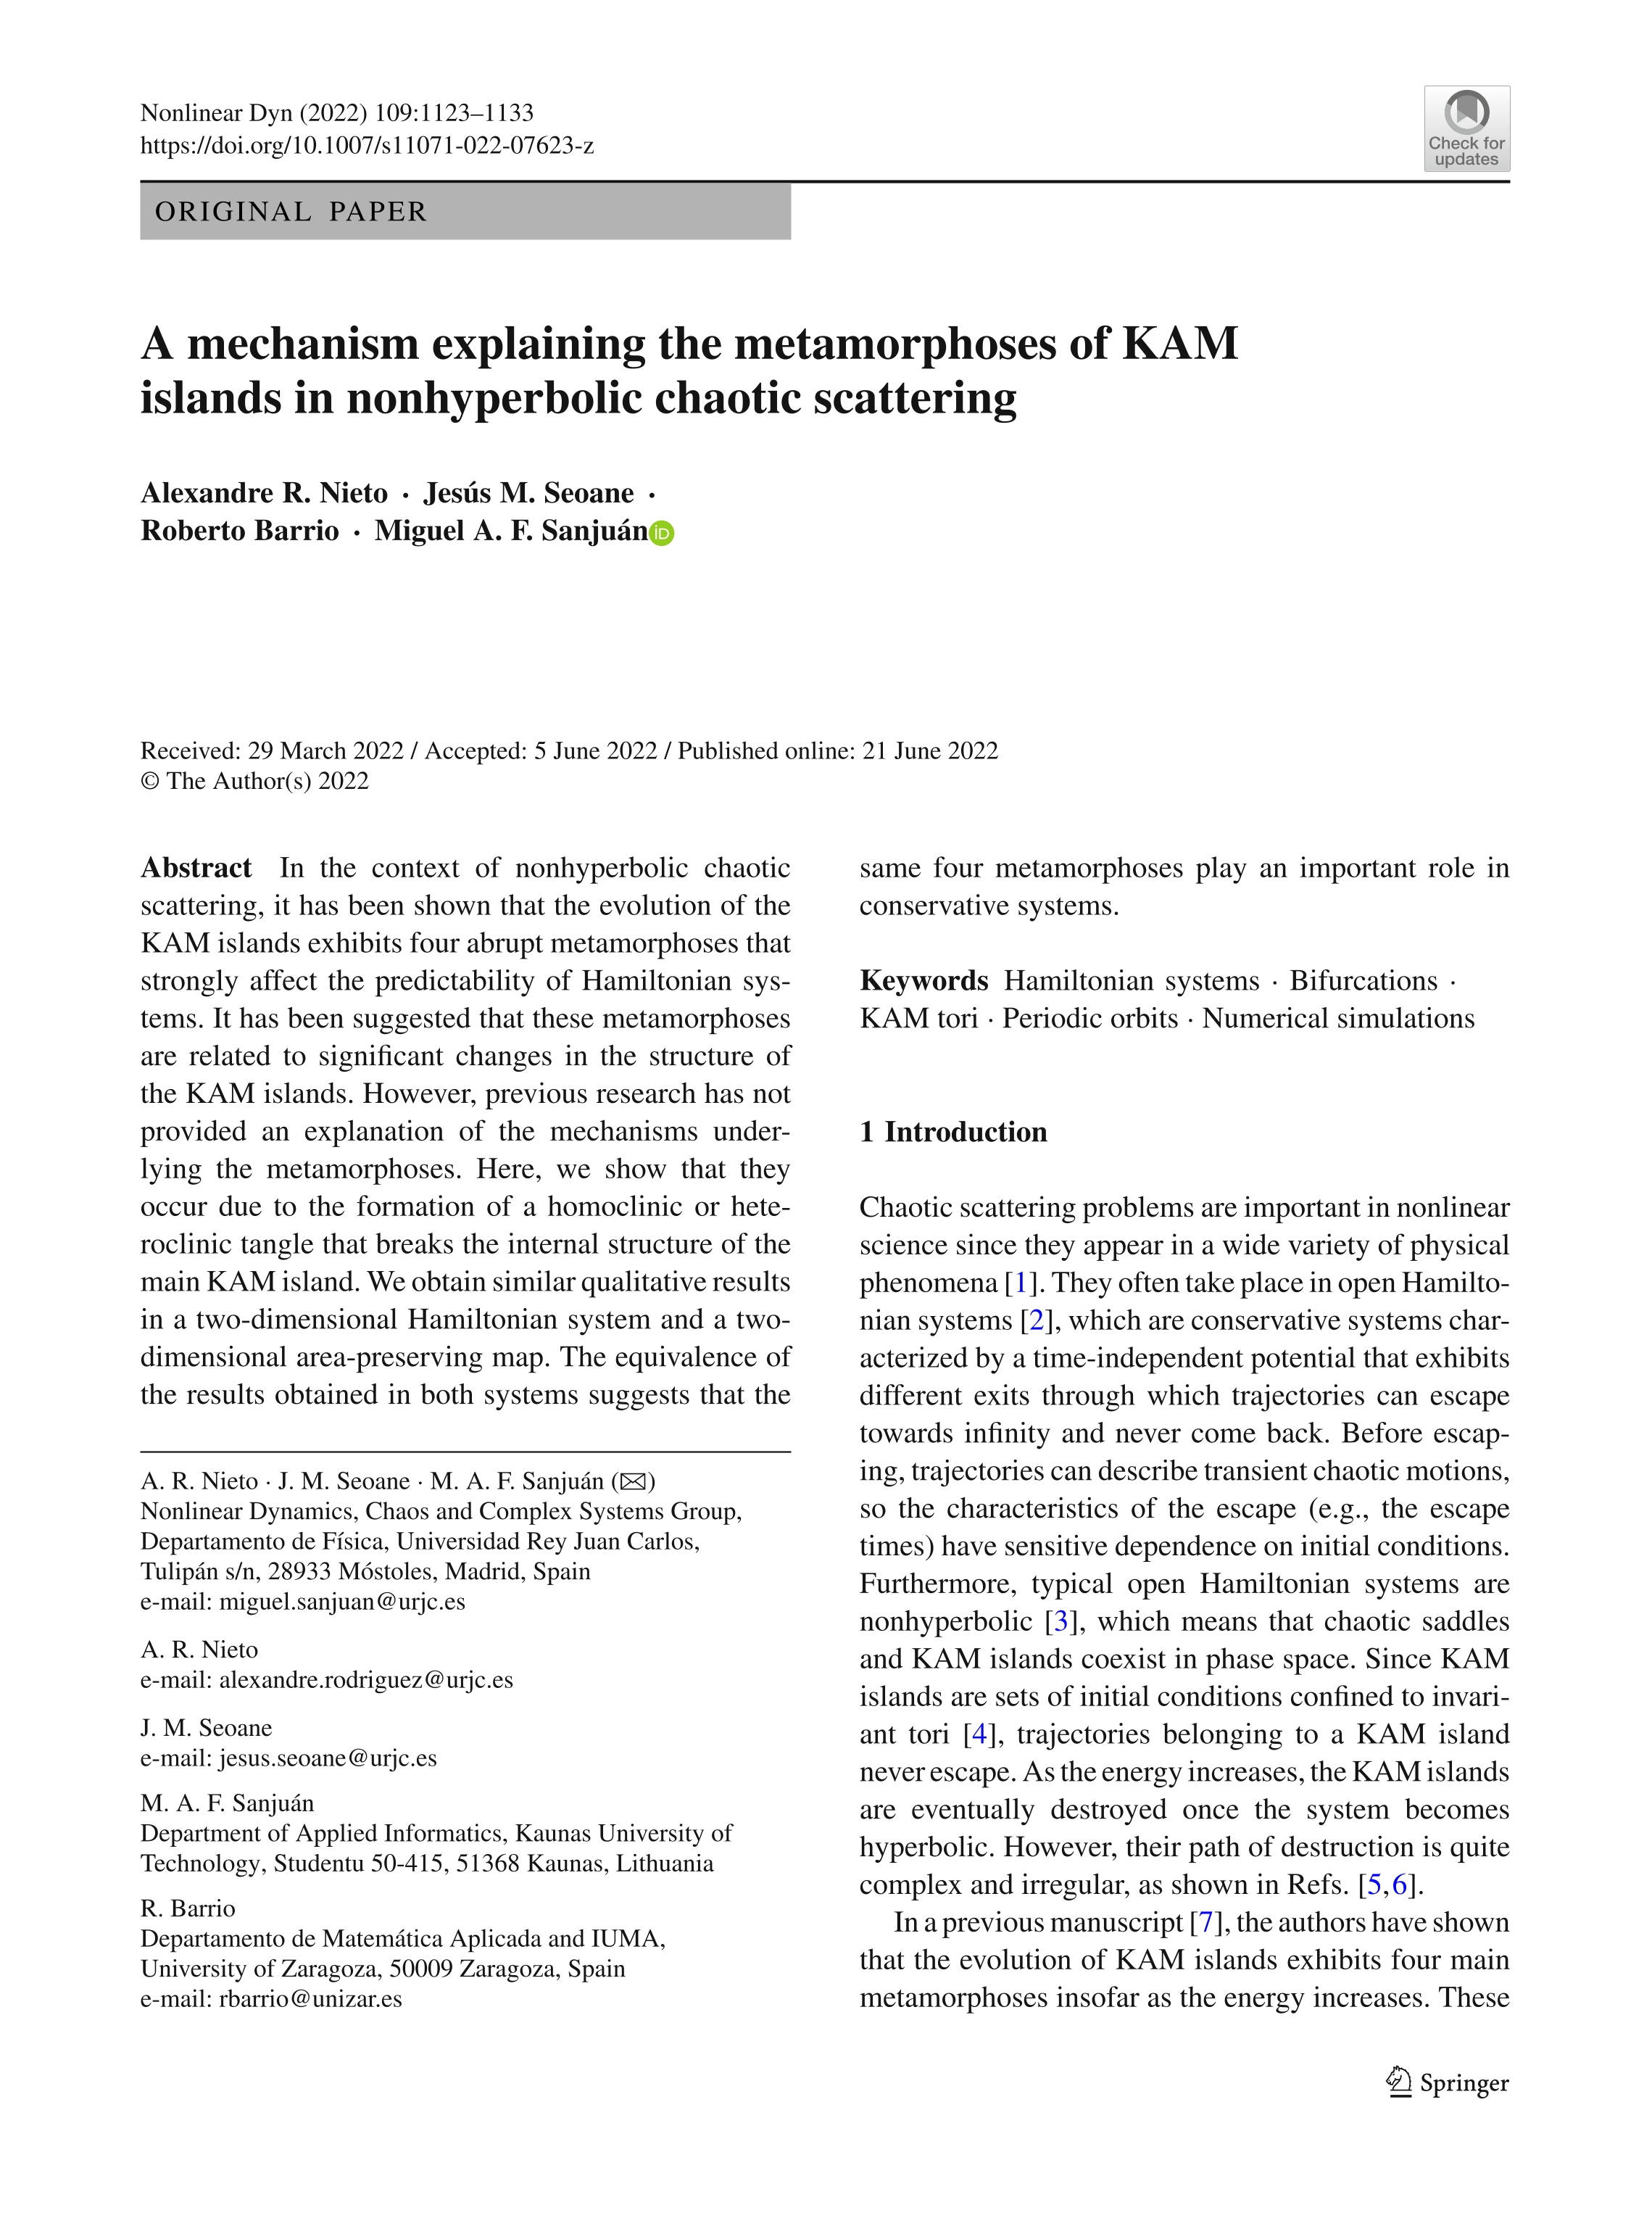 A mechanism explaining the metamorphoses of KAM islands in nonhyperbolic chaotic scattering